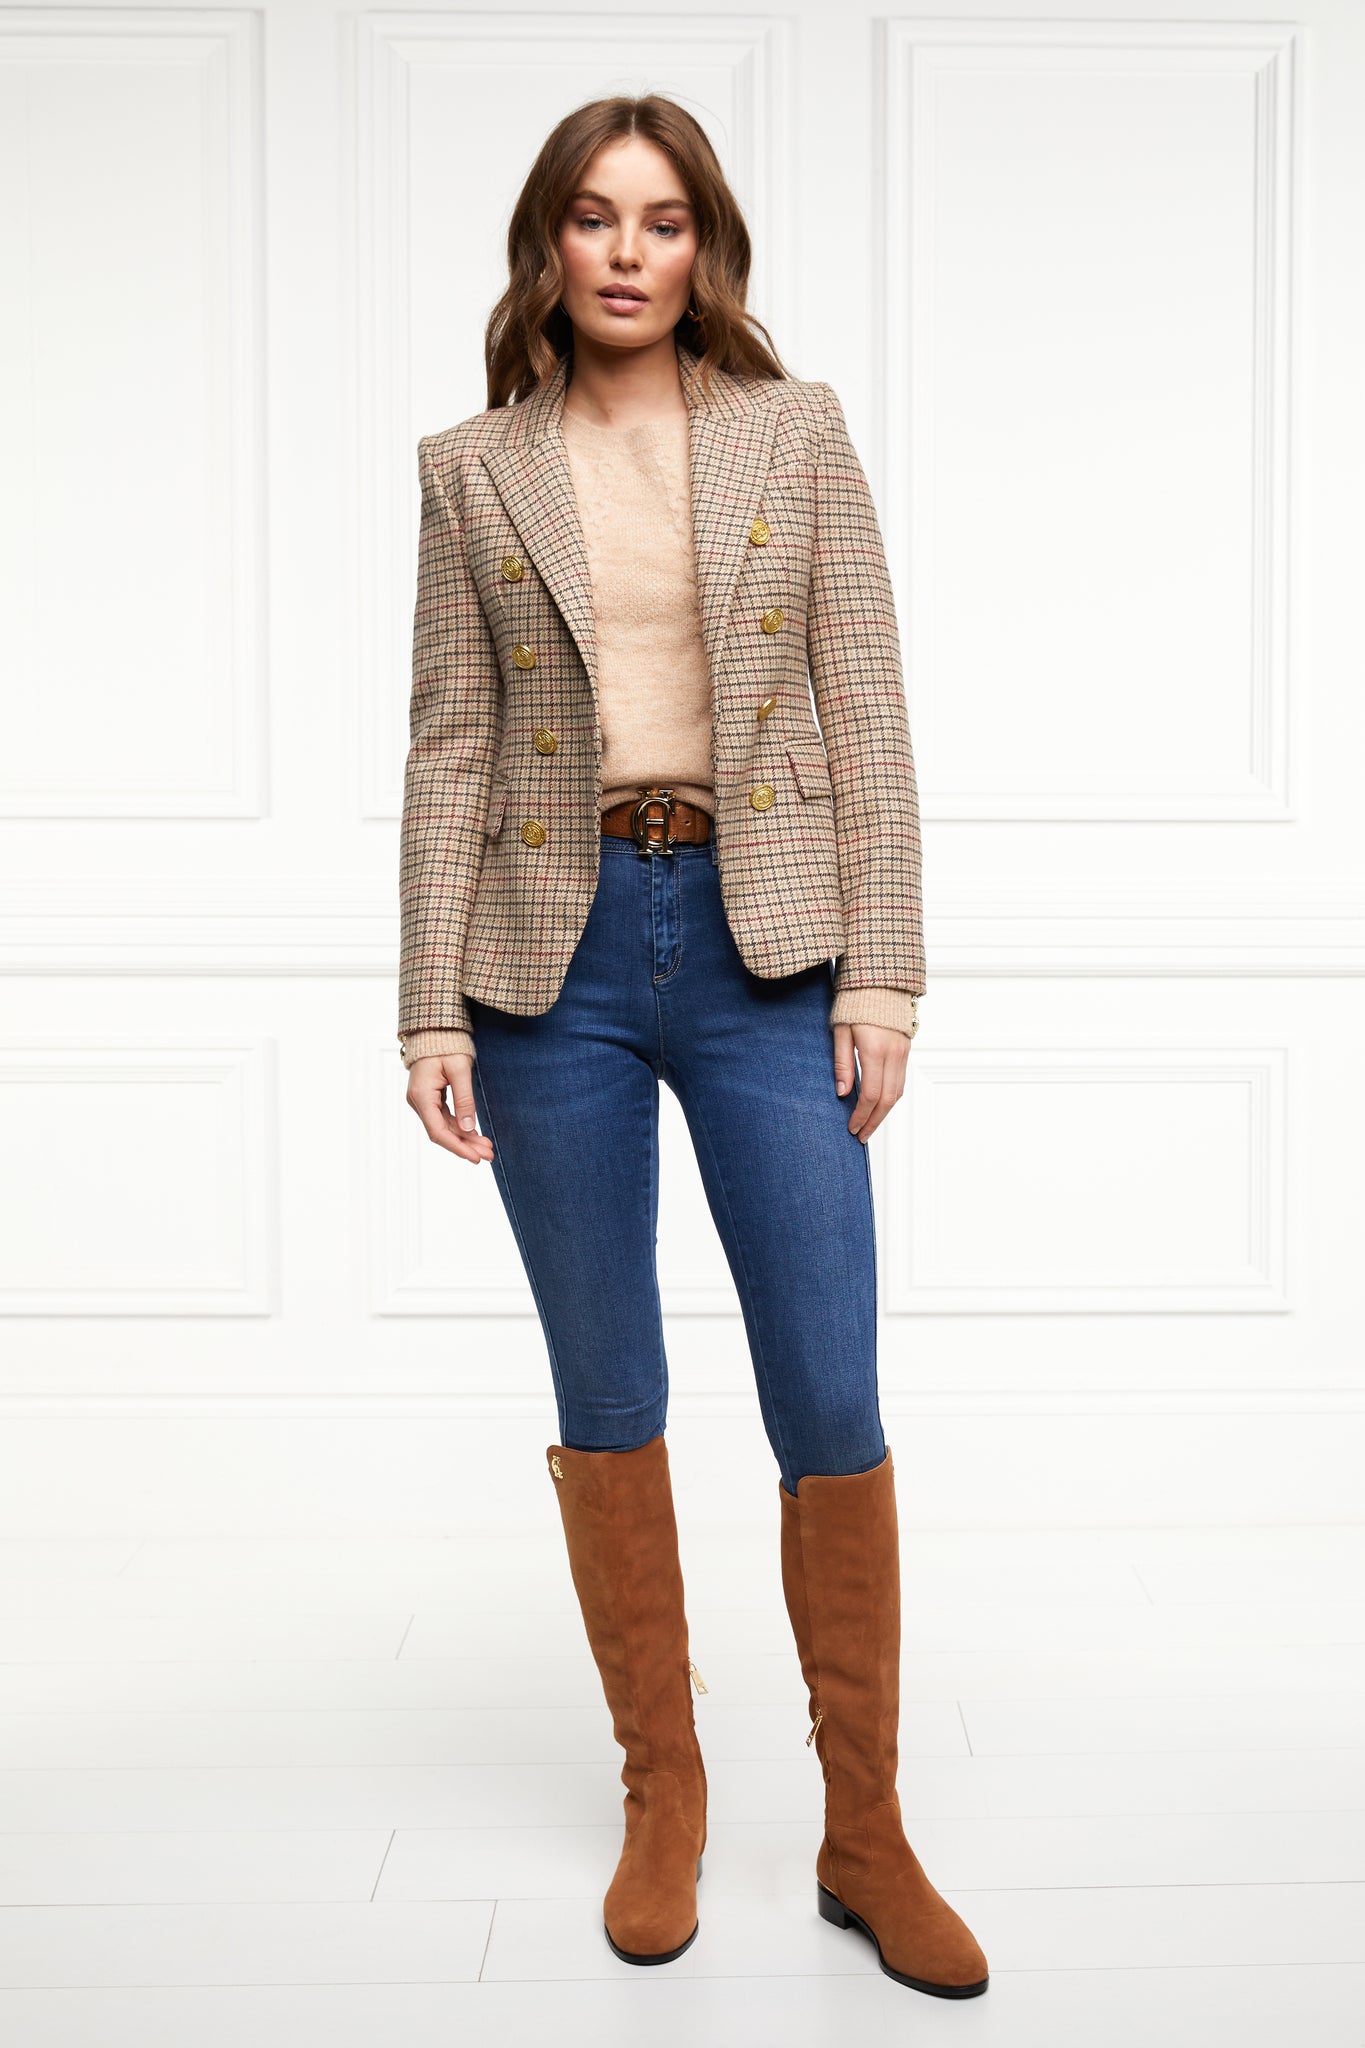 British made double breasted blazer that fastens with a single button hole to create a more form fitting silhouette with two pockets and gold button detailing this blazer is made from camel black and red check charlton tweed worn with camel jumper classic indigo skinny jeans and tan knee high boots